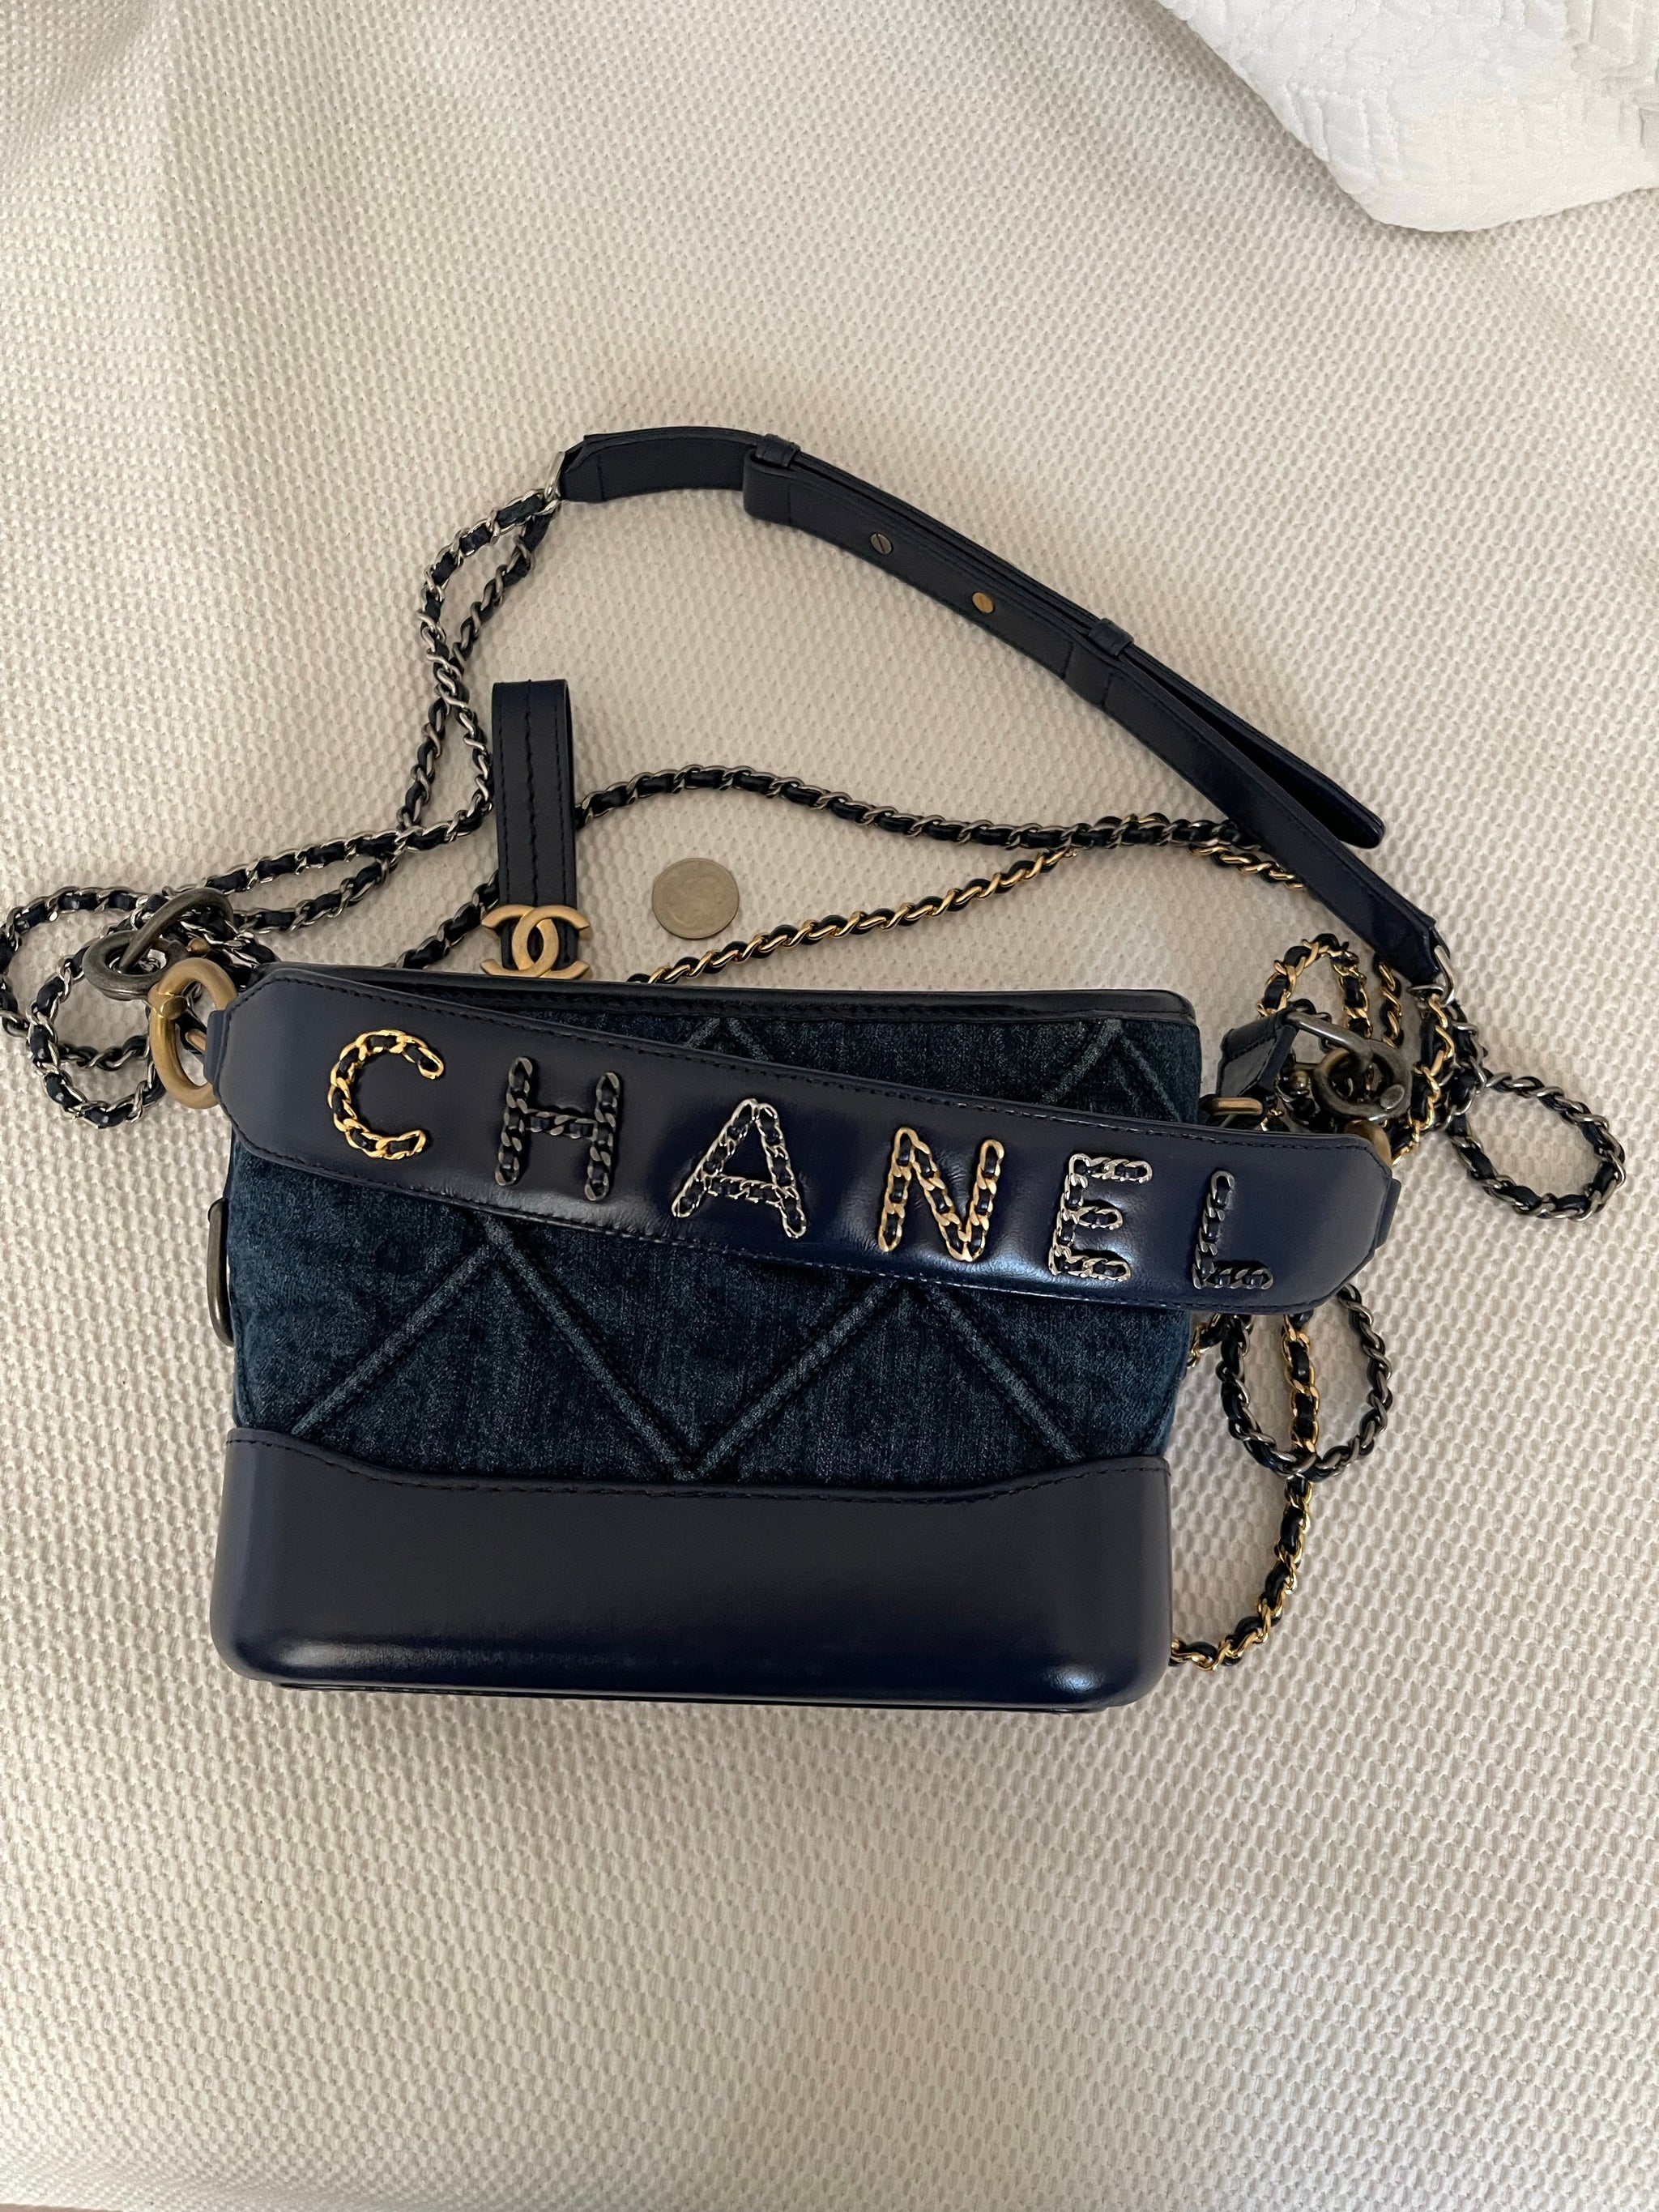 Sold at Auction: Chanel Gabrielle Tote Bag (VIP)